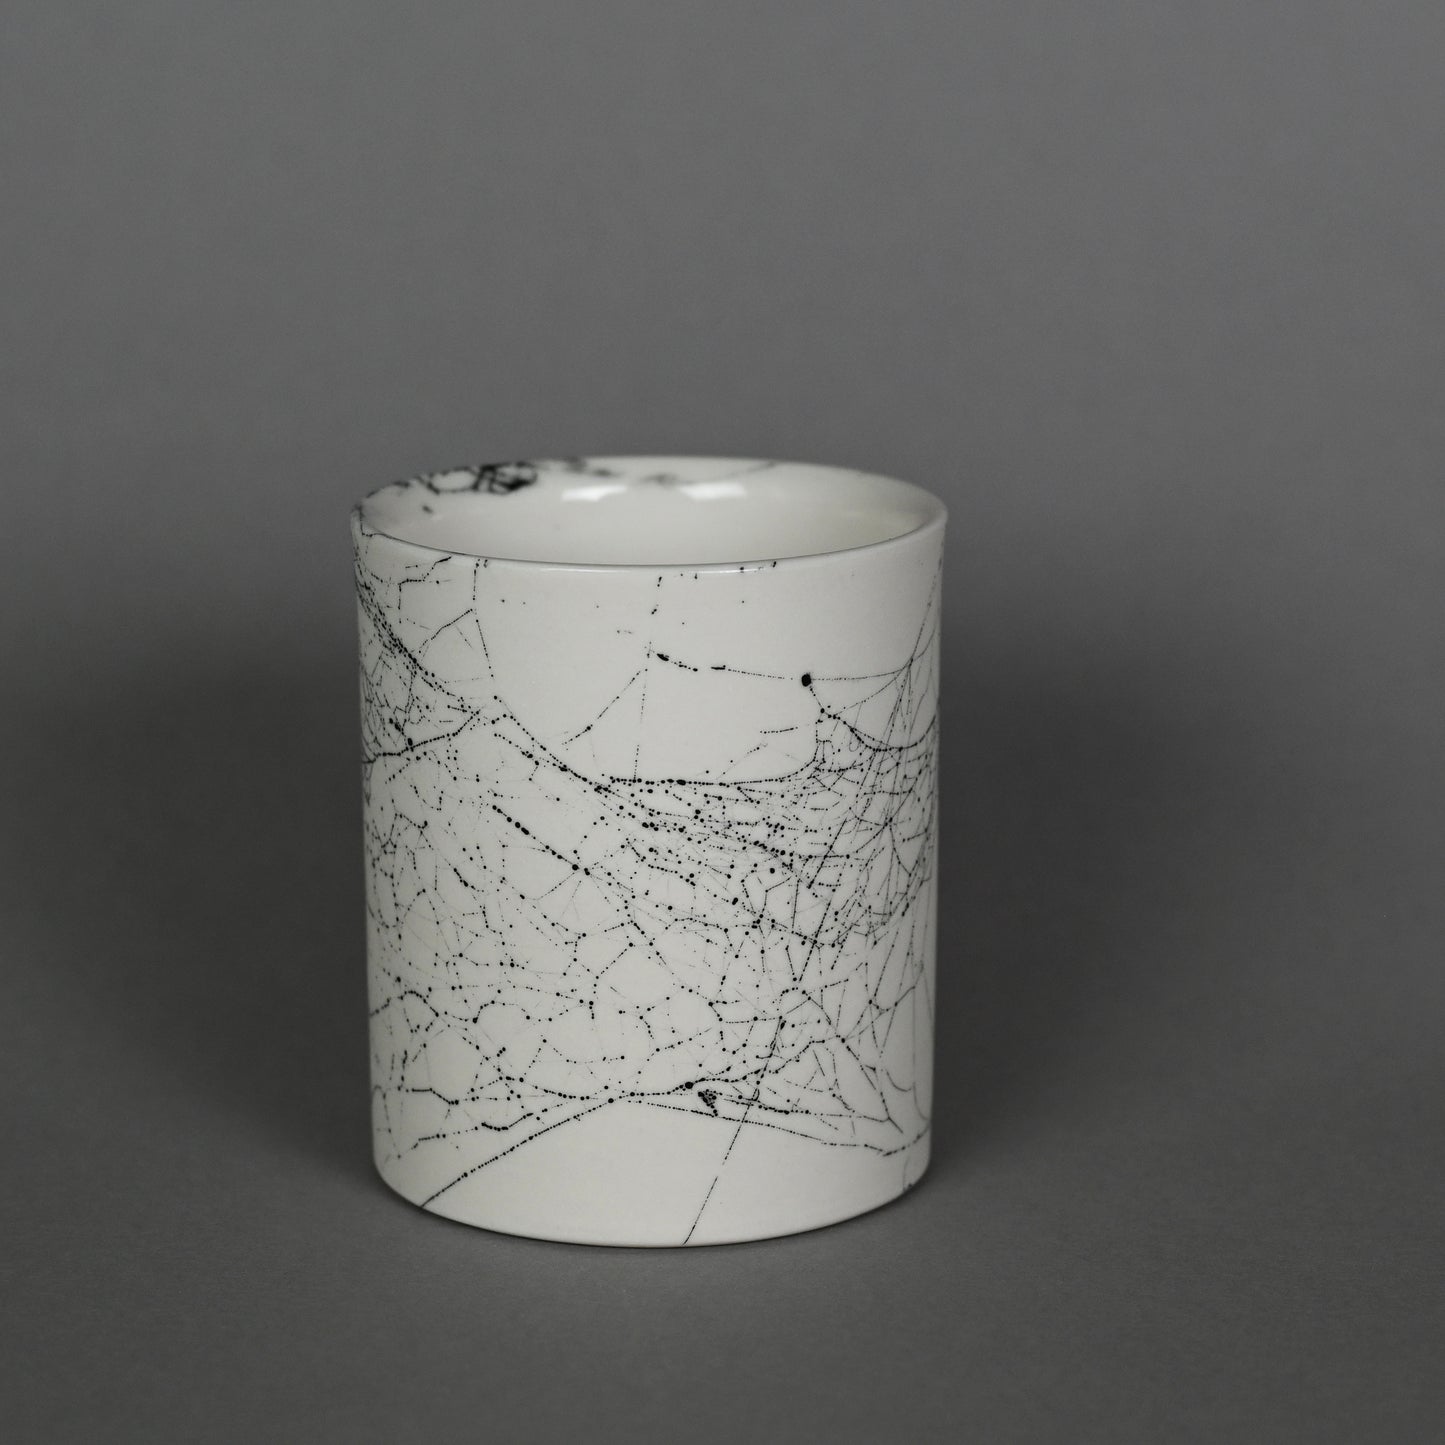 Web on Clay (215), Collected September 19, 2022